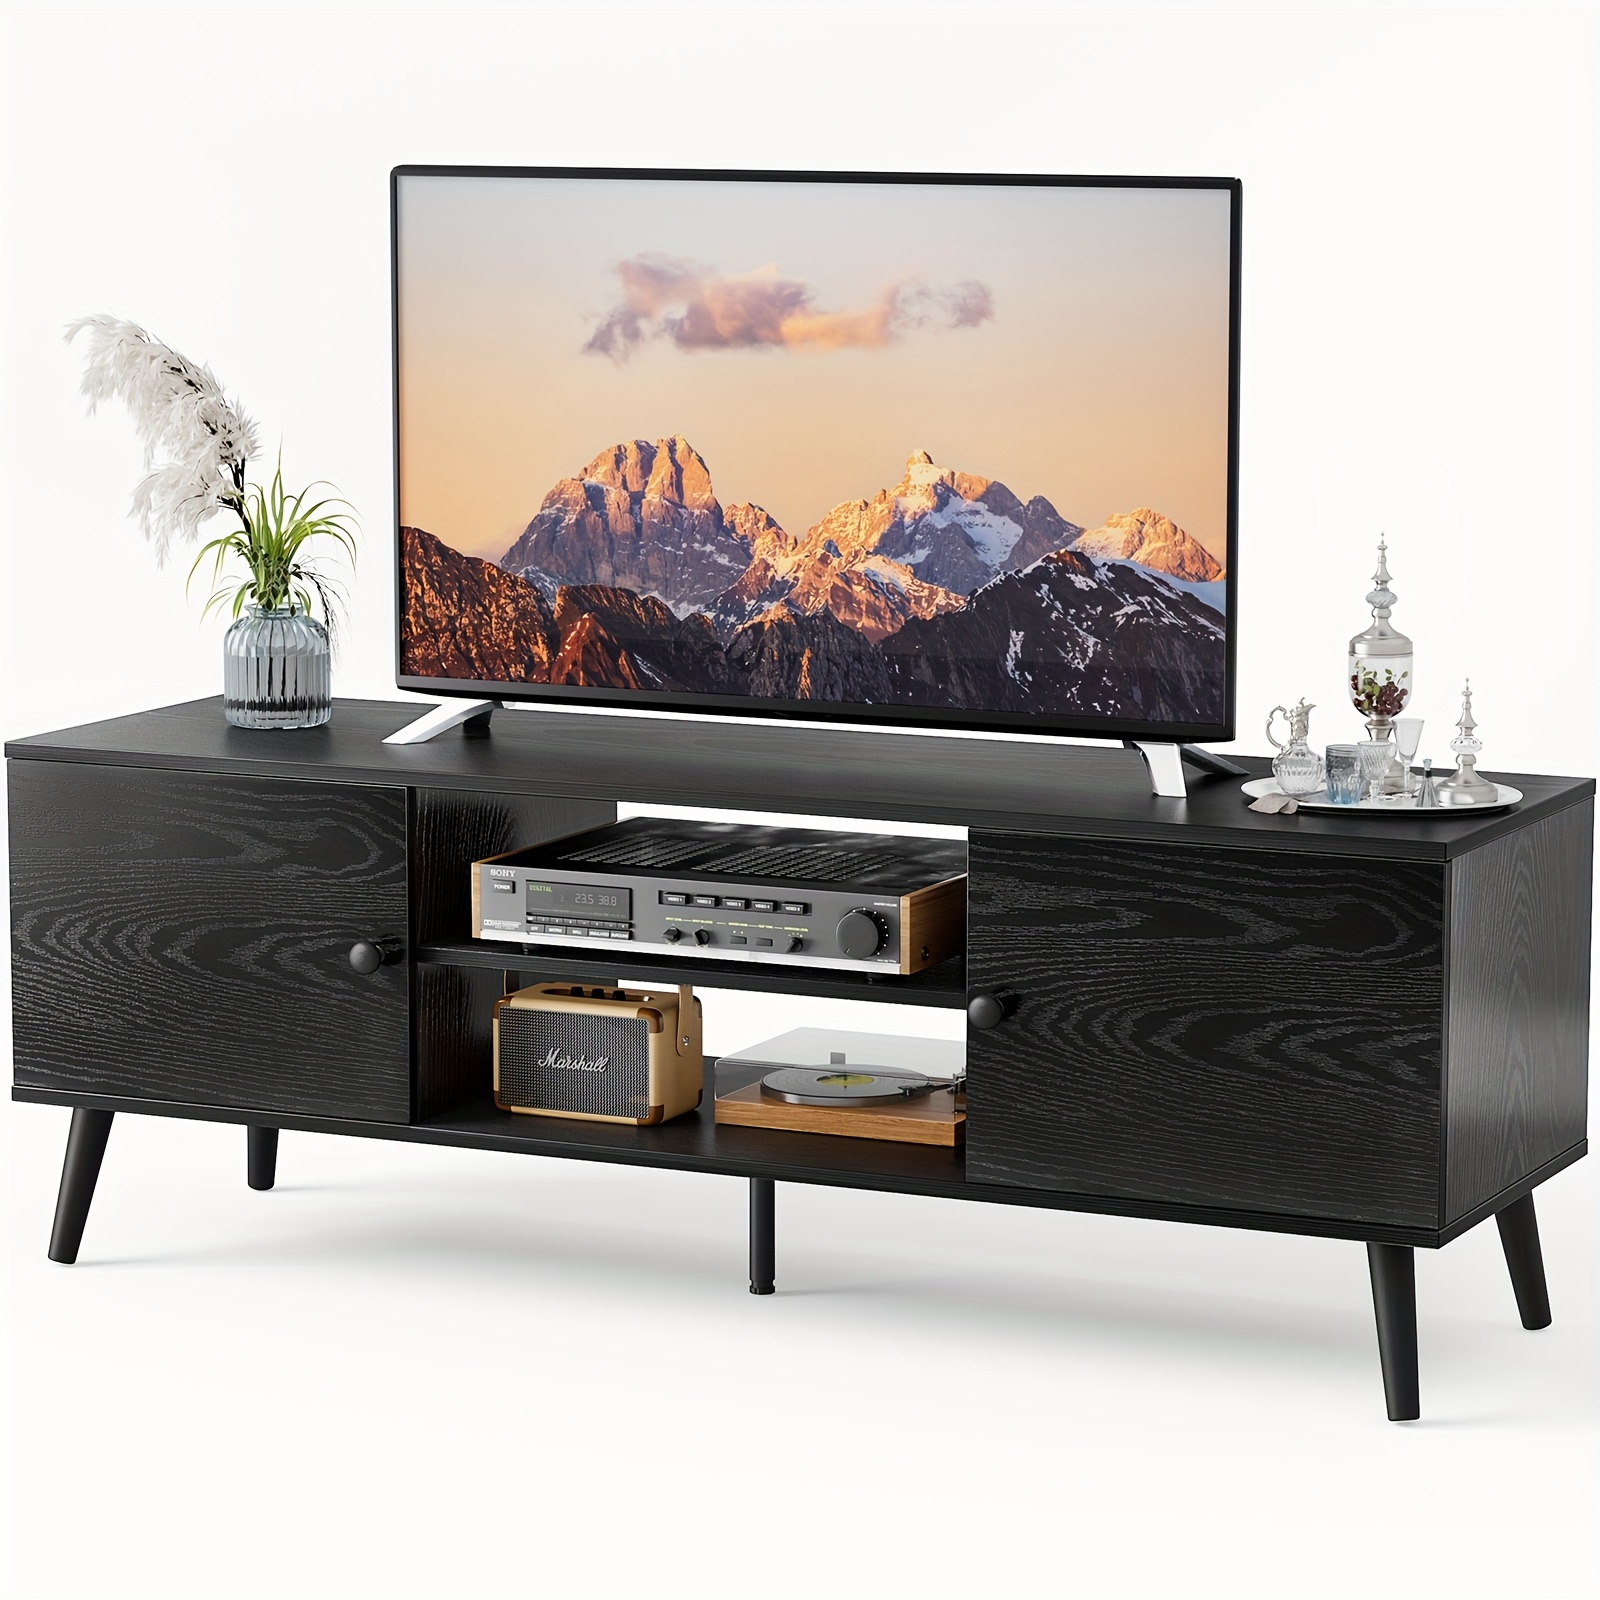 

Tv Stand For 55 , Entertainment Center With Storage Cabinet, Media Console Table, Adjustable Hinge, Wooden Television Furniture For Living Room